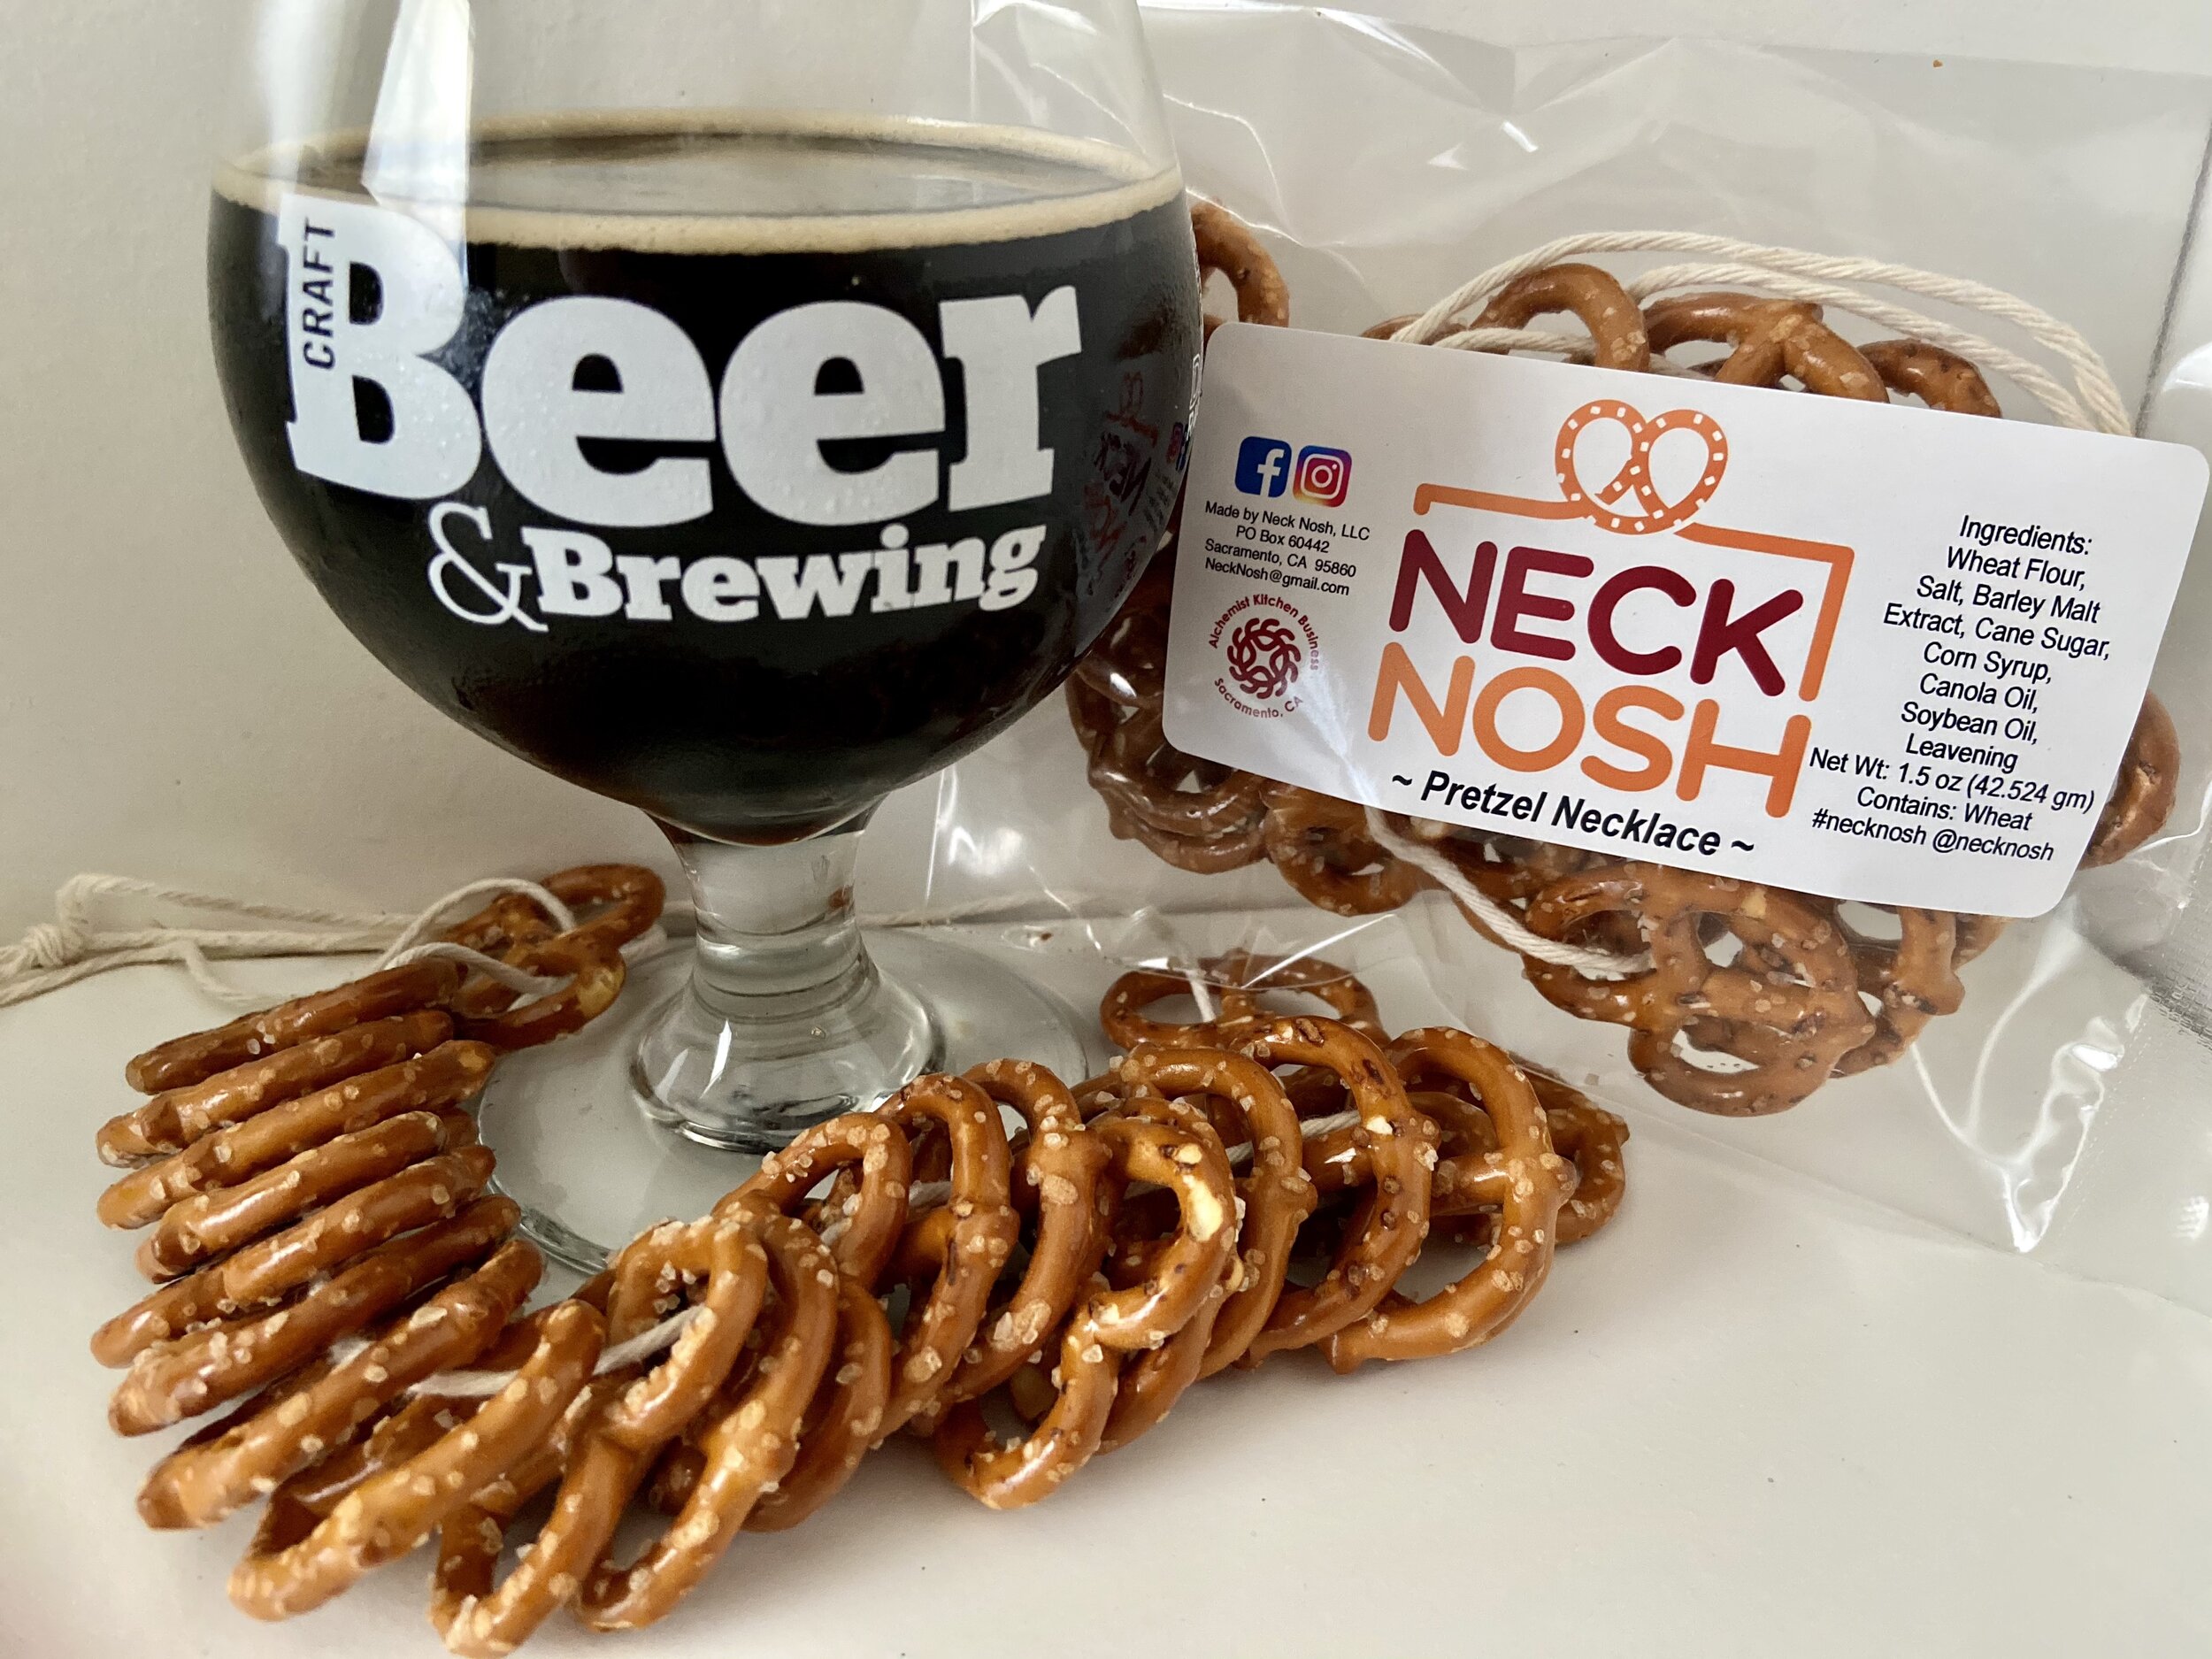 Inland-NW-Craft-Beer-Festival-Spokane-pretzel-necklace - Peaks and Pints  Proctor TacomaPeaks and Pints Proctor Tacoma |